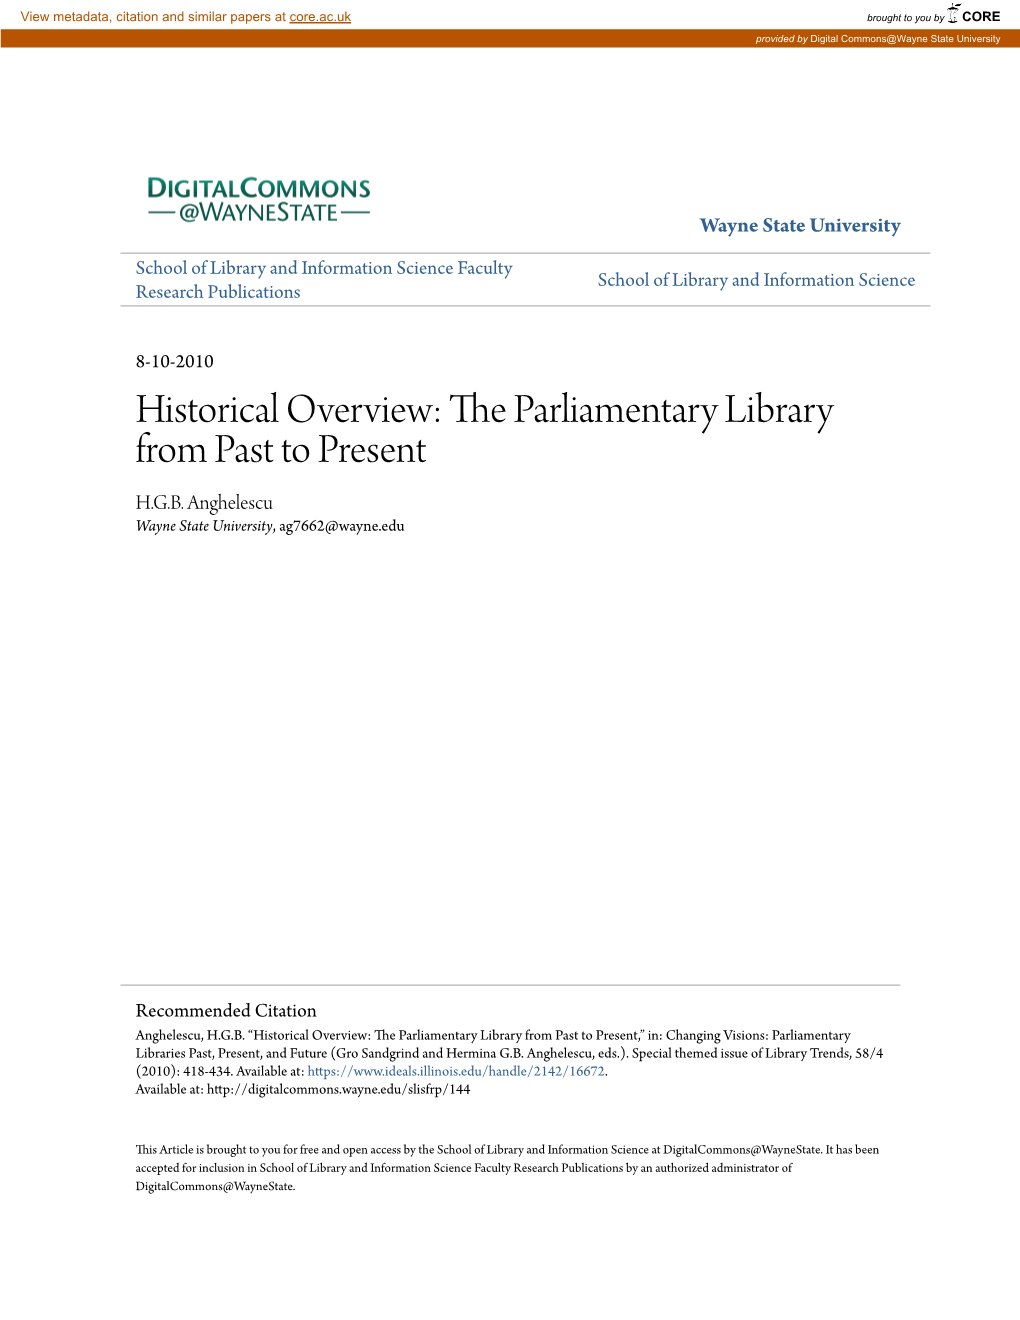 Historical Overview: the Parliamentary Library from Past to Present